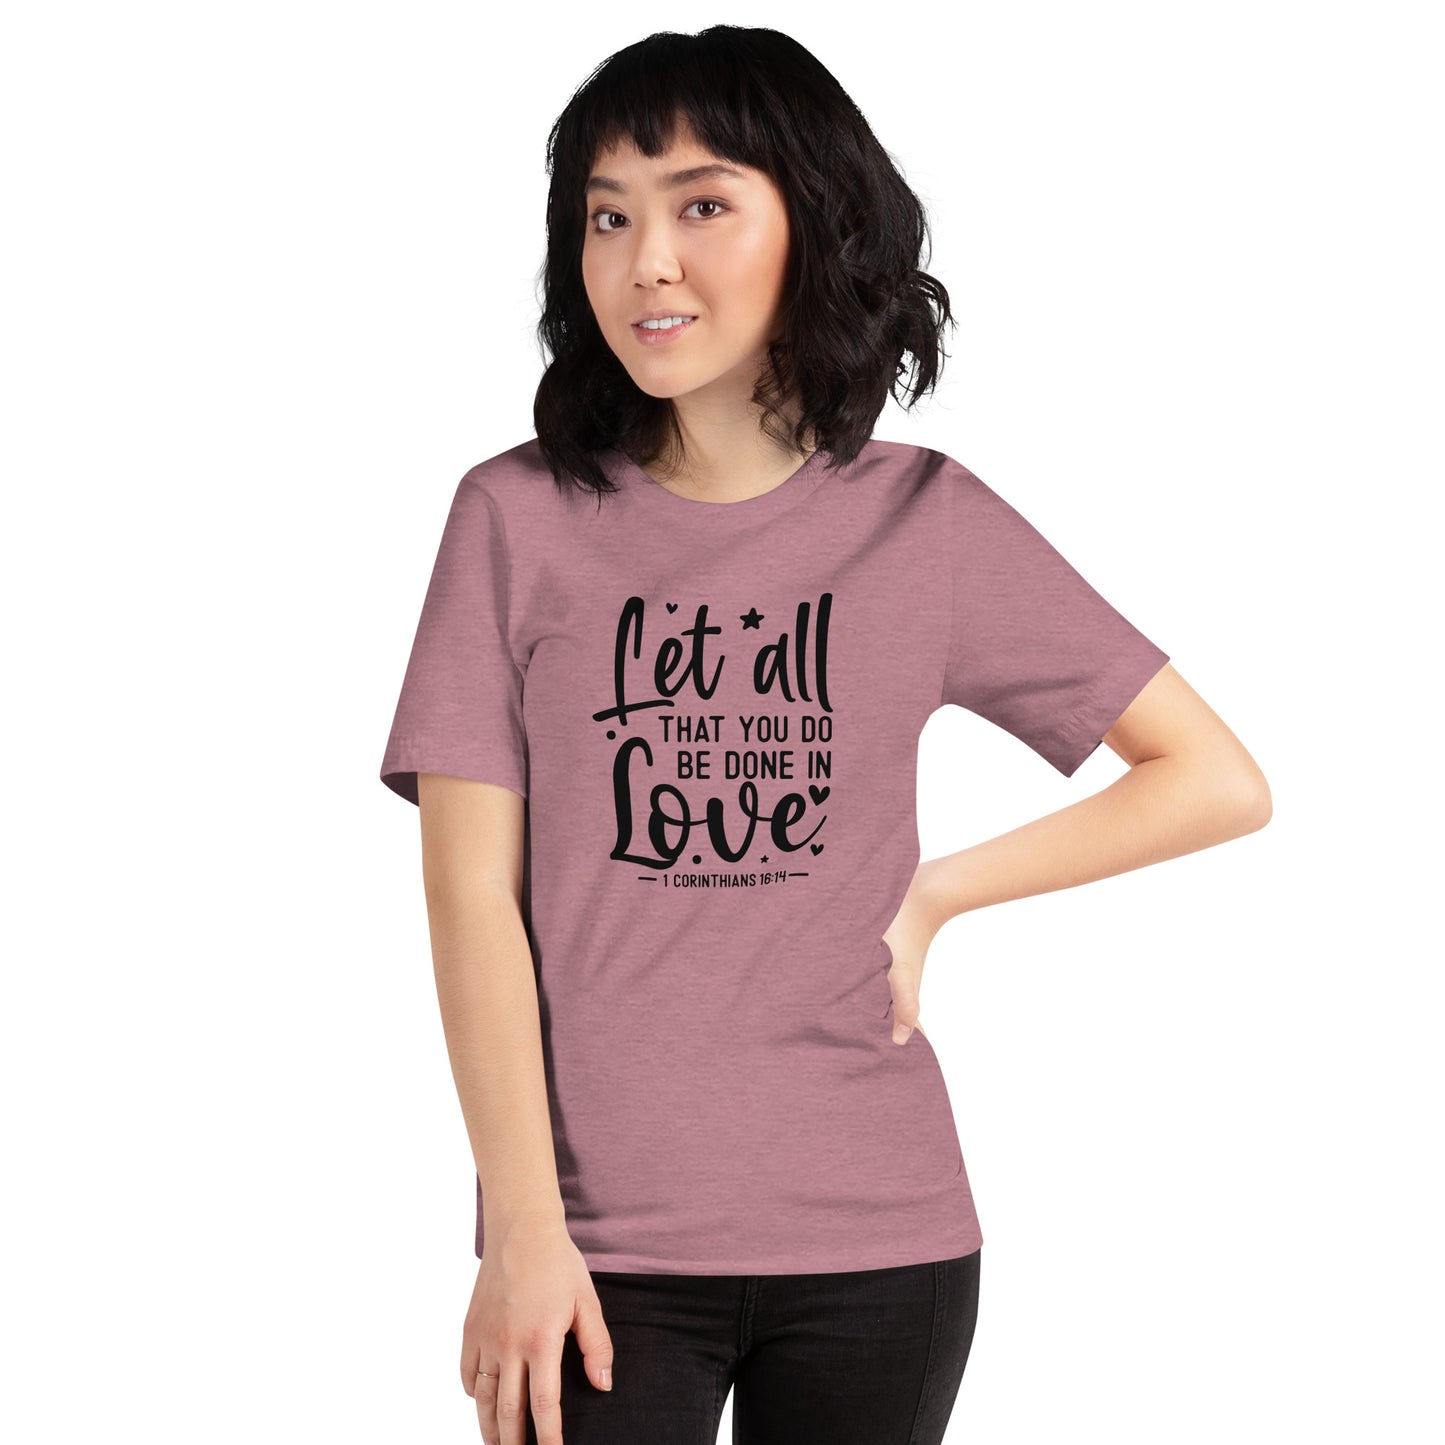 Let All Be Done In Love Women's Short Sleeve T-Shirt